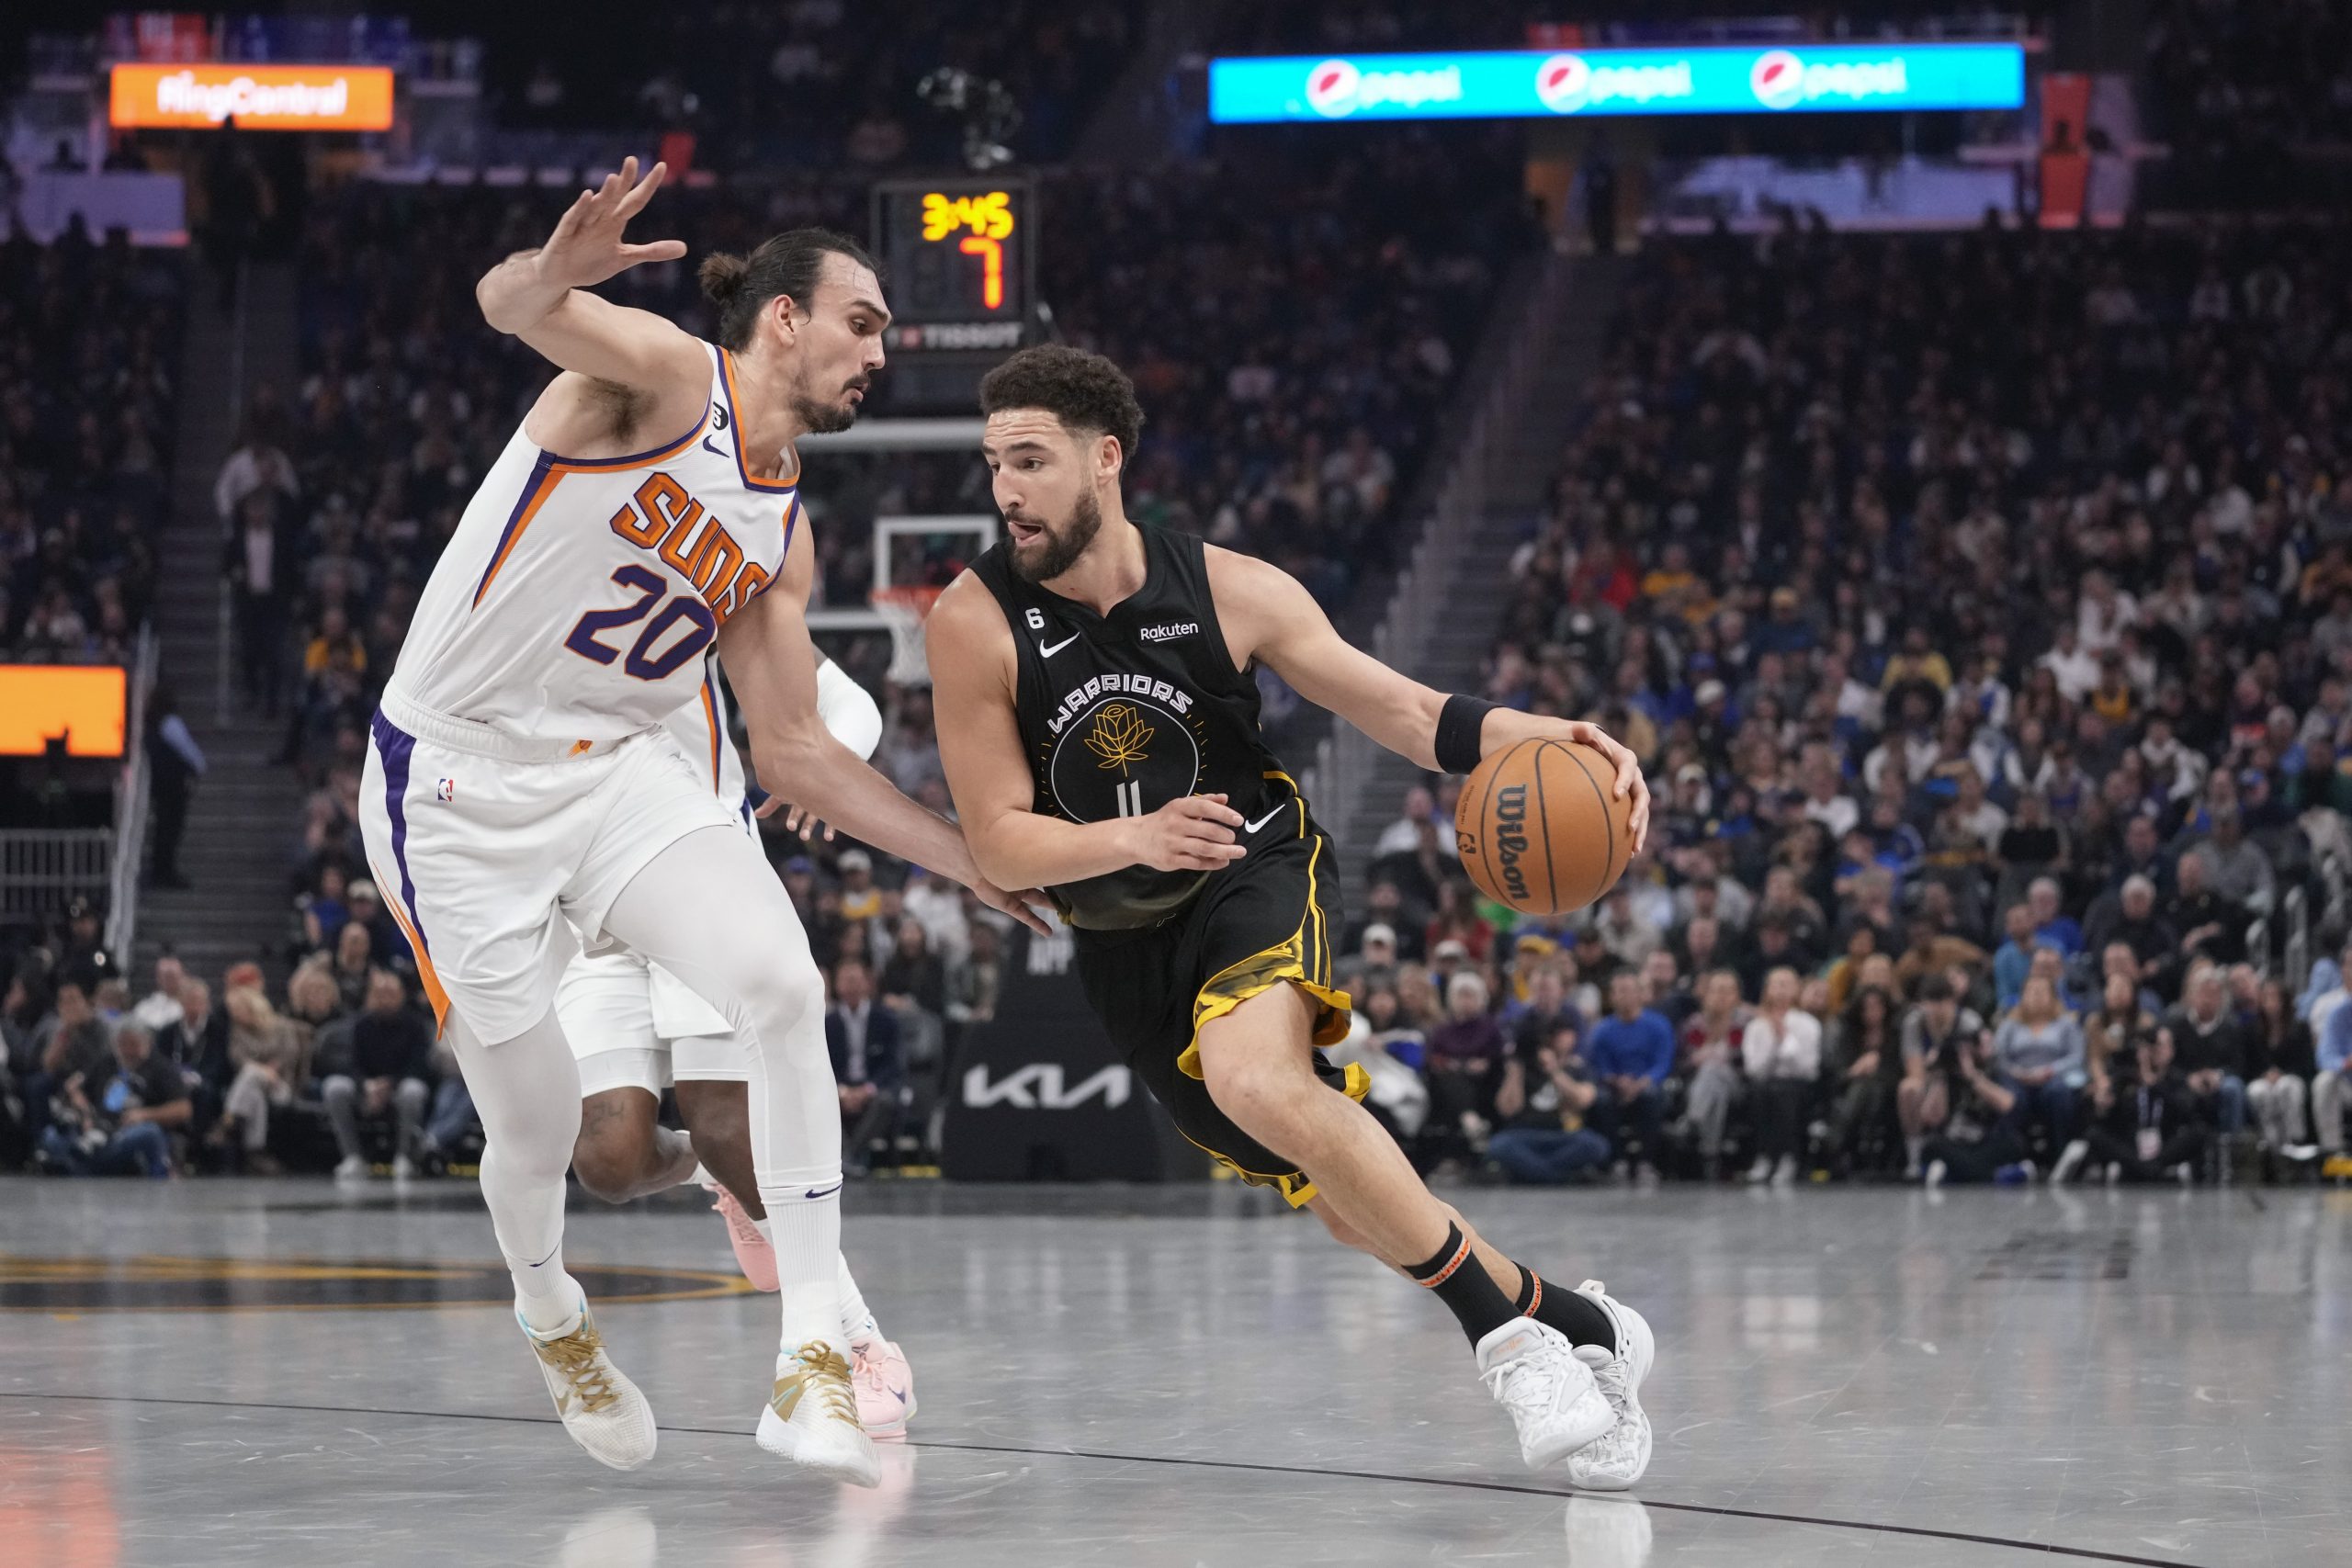 Golden State Warriors guard Klay Thompson (11) drives while defended by Phoenix Suns forward Dario Saric (20) during the first half of an NBA basketball game in San Francisco, Tuesday, Jan. 10, 2023. (AP Photo/Godofredo A. Vásquez)